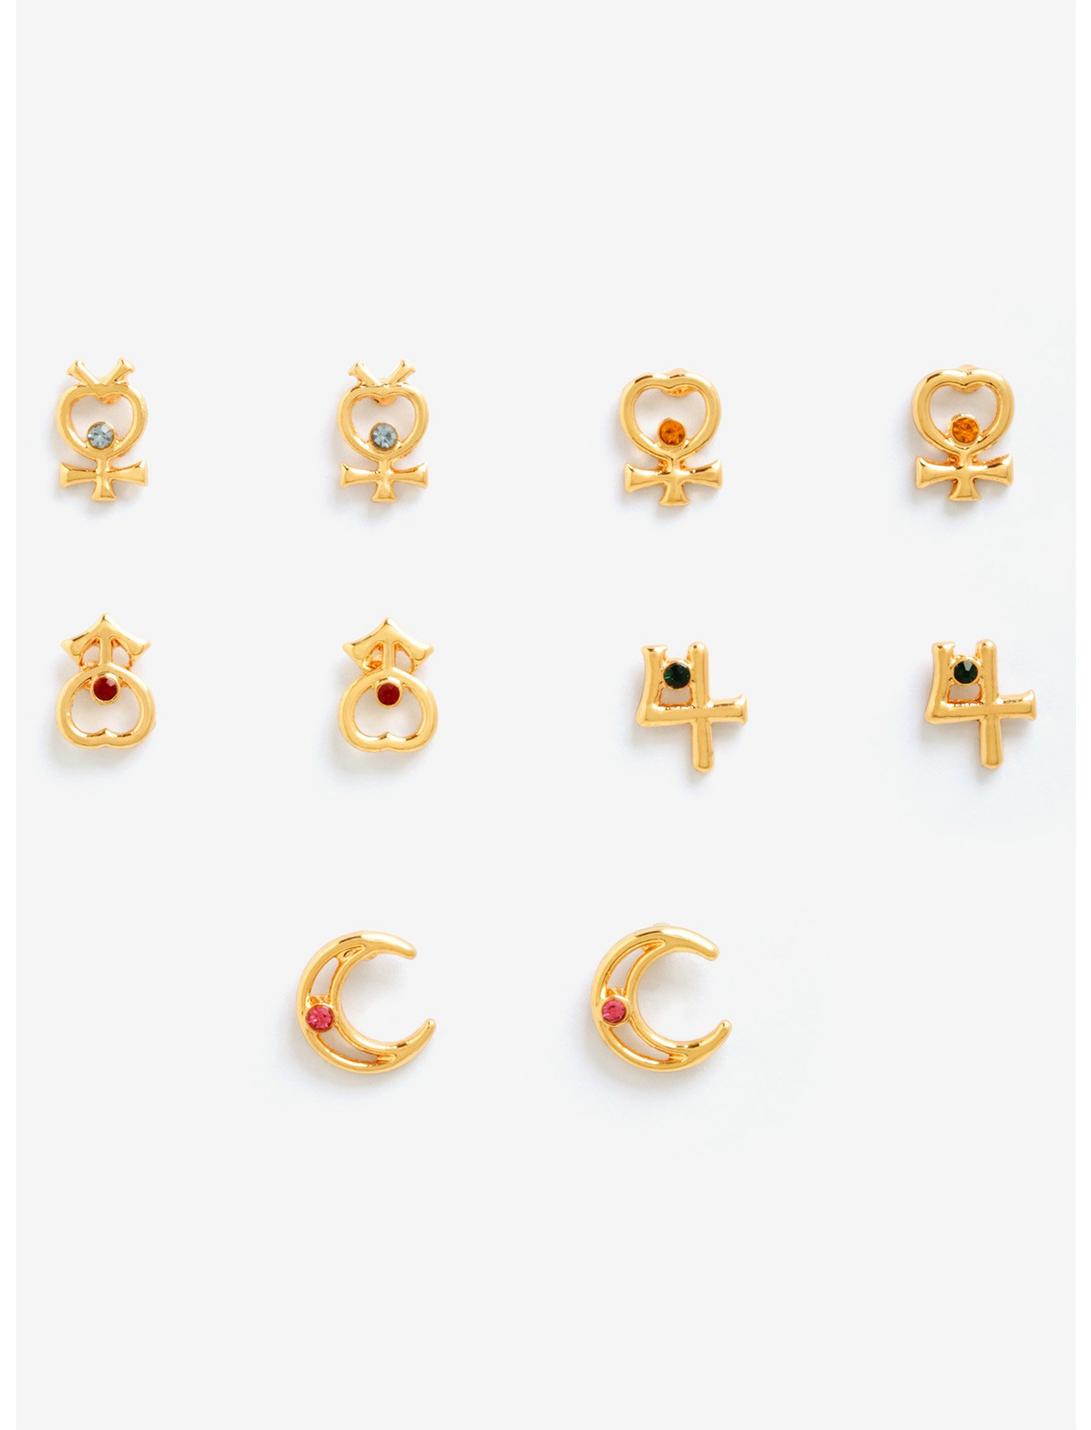 Sailor Moon Sailor Scout Gold Earring Set - BoxLunch Exclusive, , hi-res